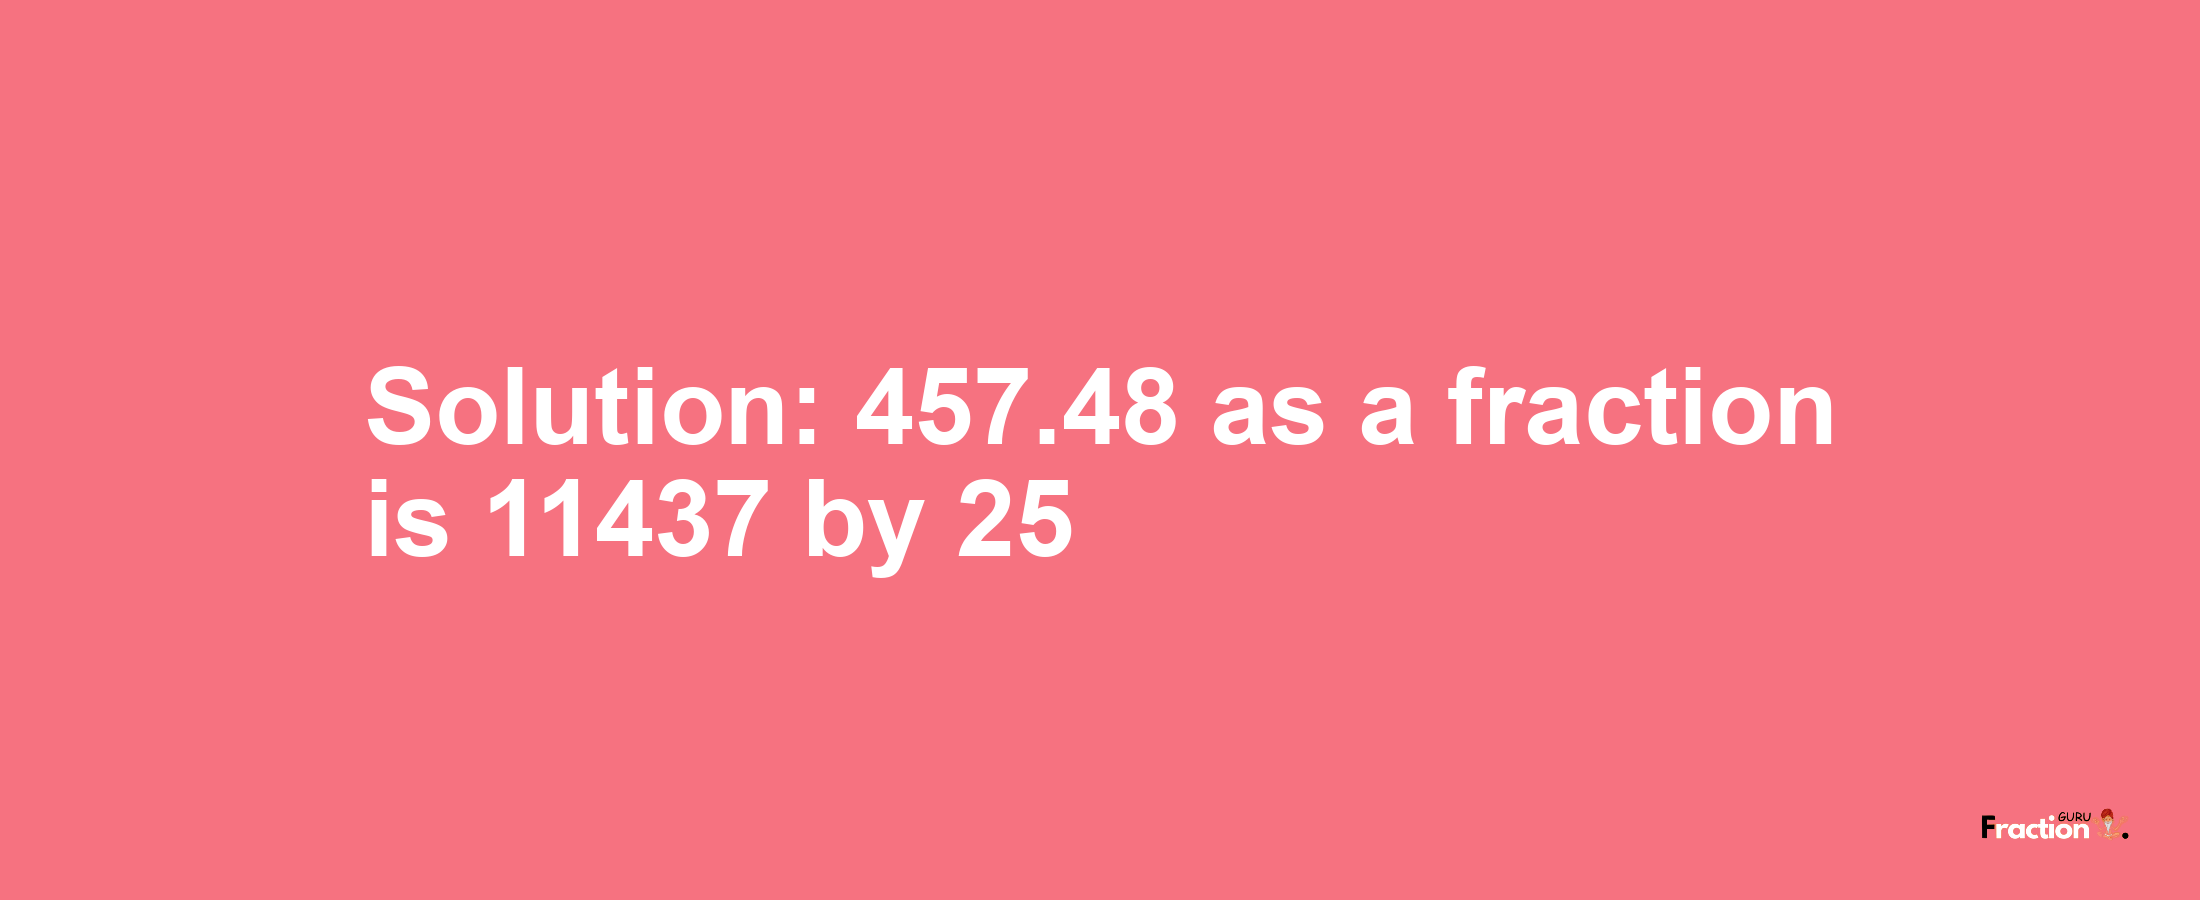 Solution:457.48 as a fraction is 11437/25